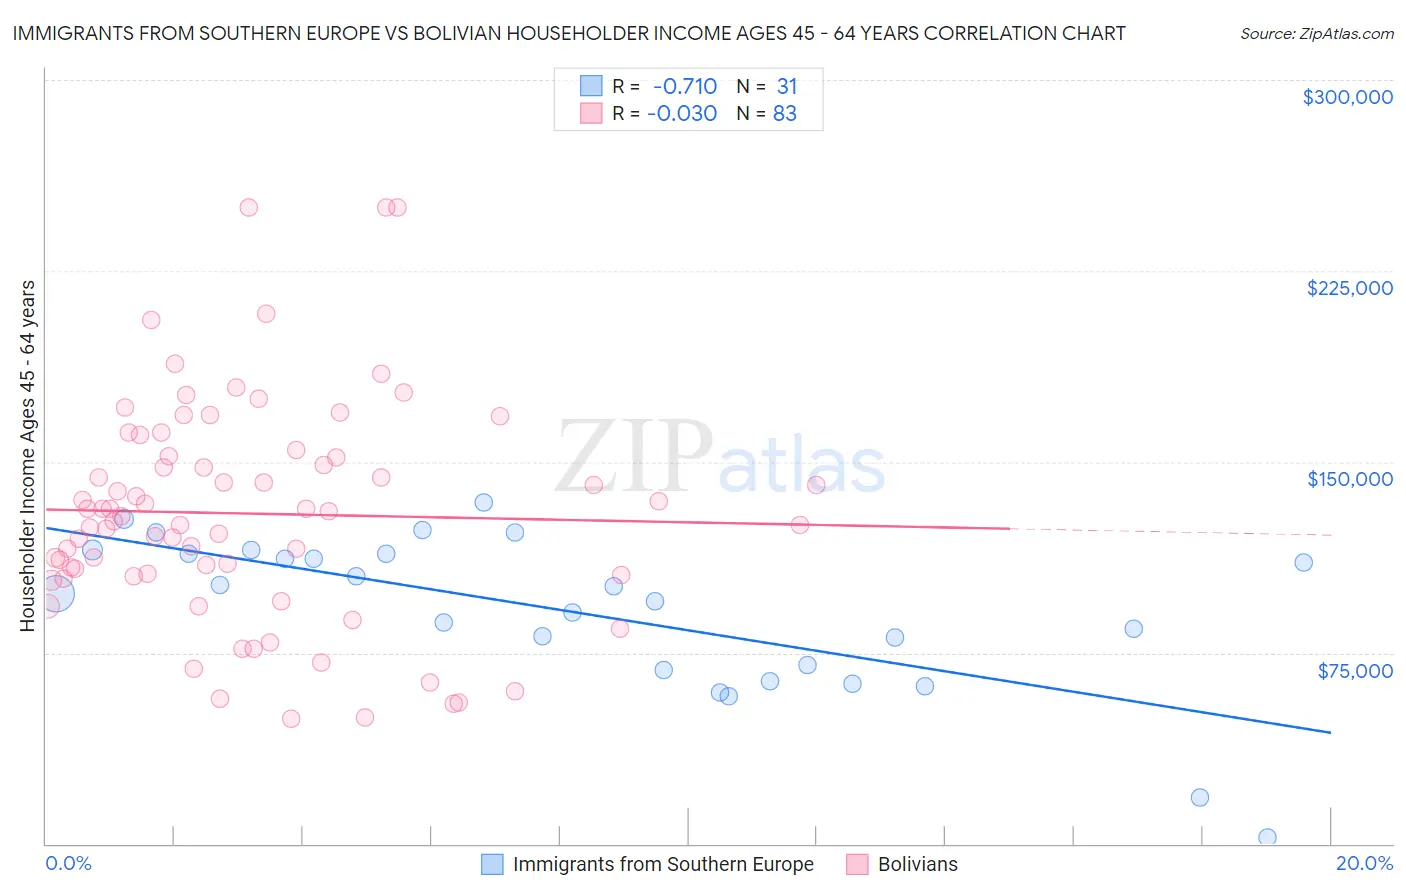 Immigrants from Southern Europe vs Bolivian Householder Income Ages 45 - 64 years